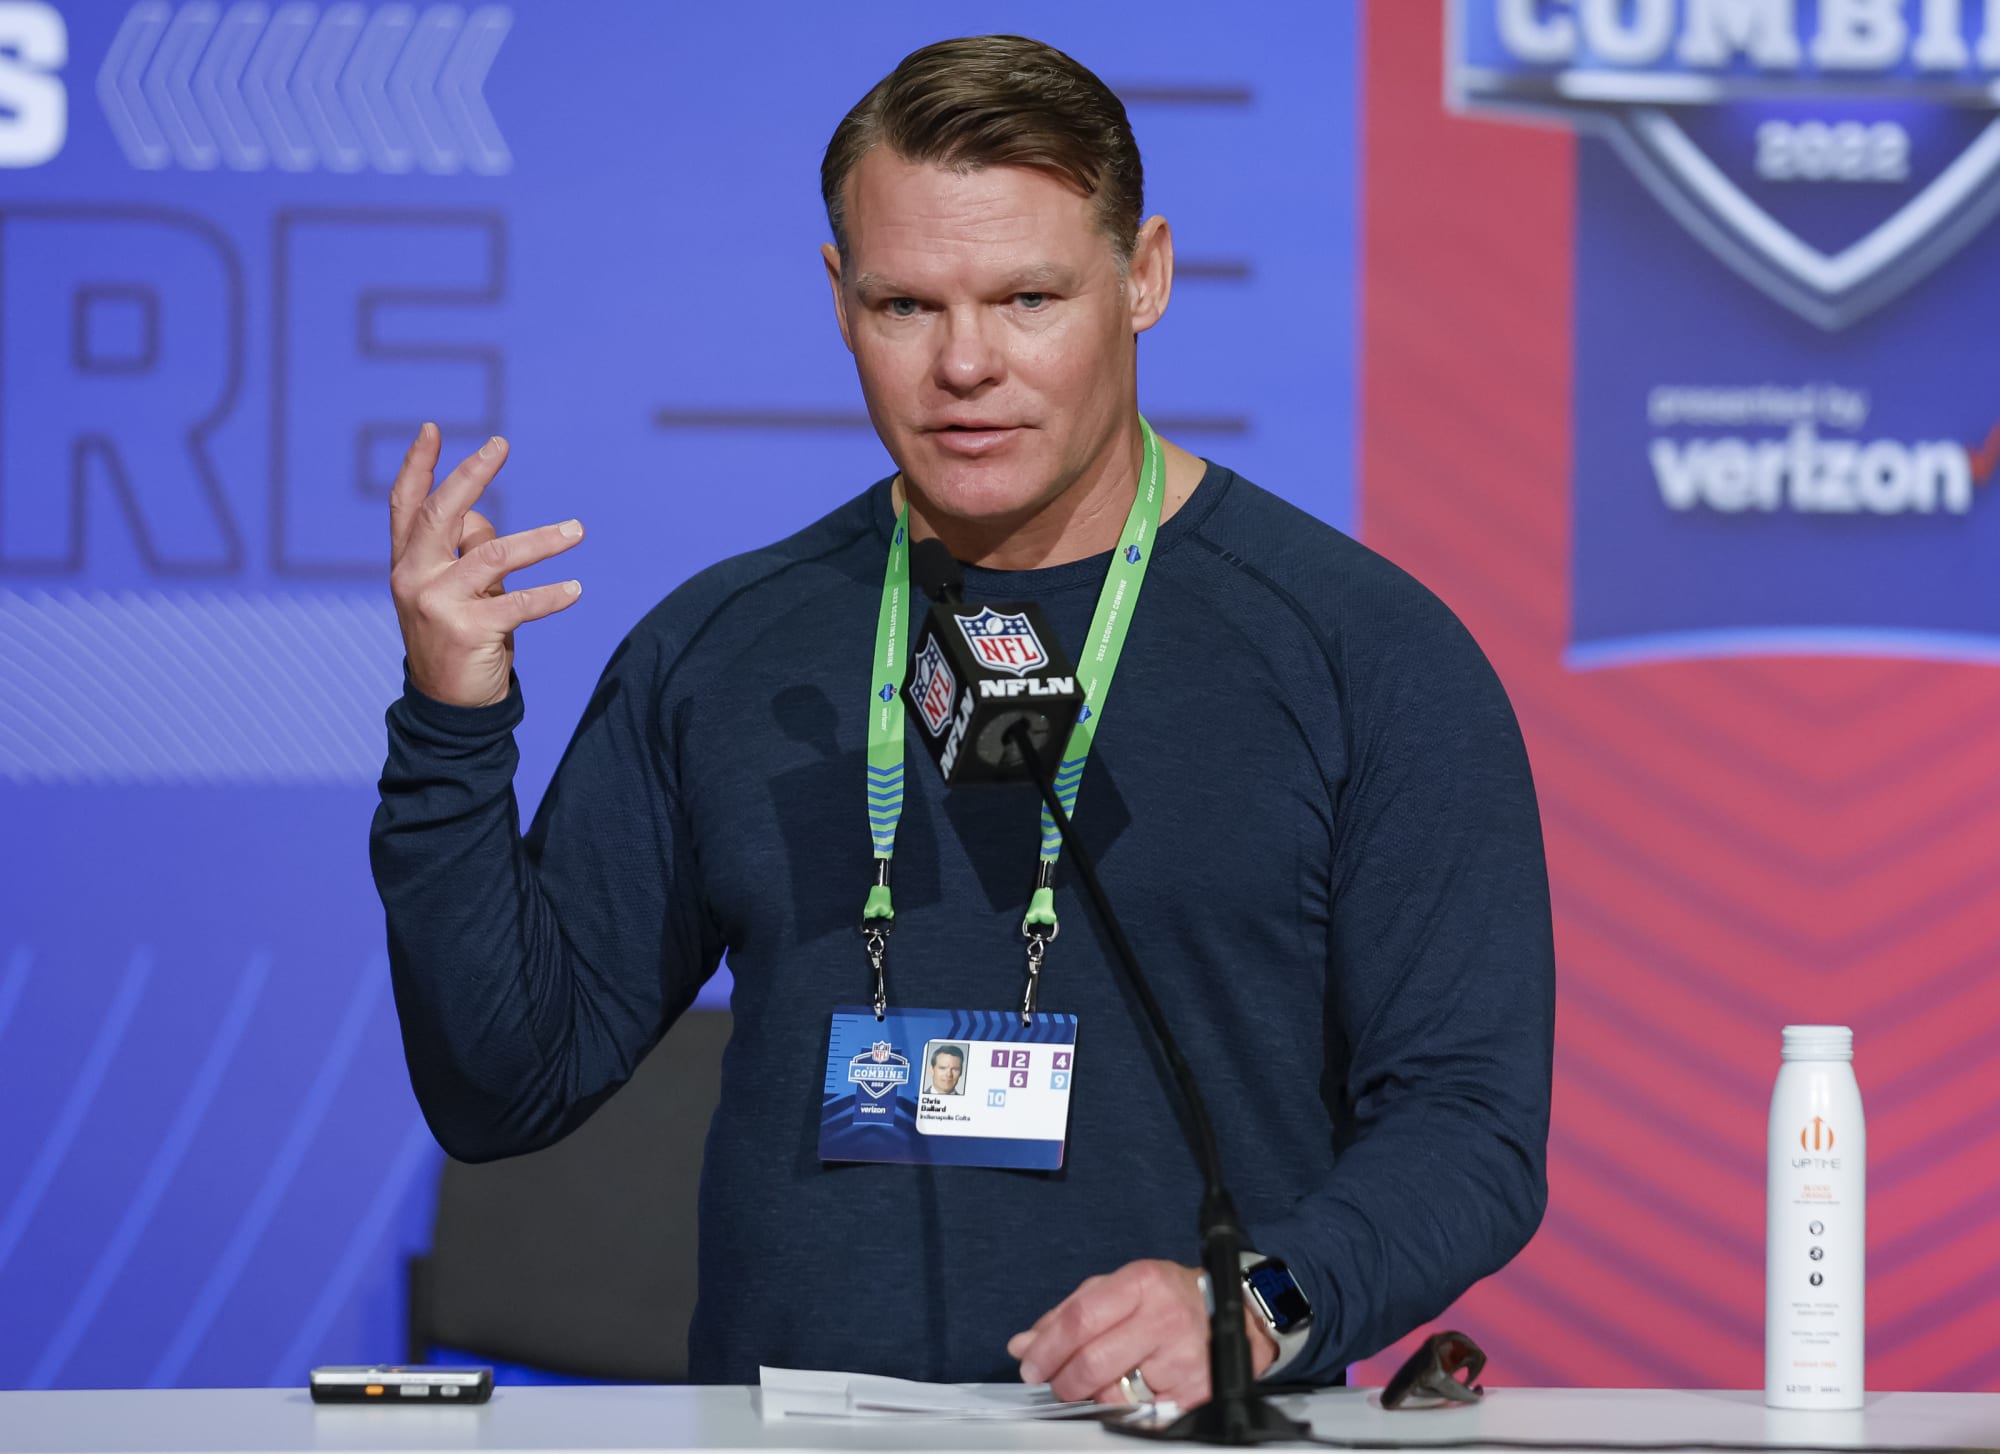 Chris Ballard says there’s no guarantee Colts will select a quarterback in the 2023 NFL Draft